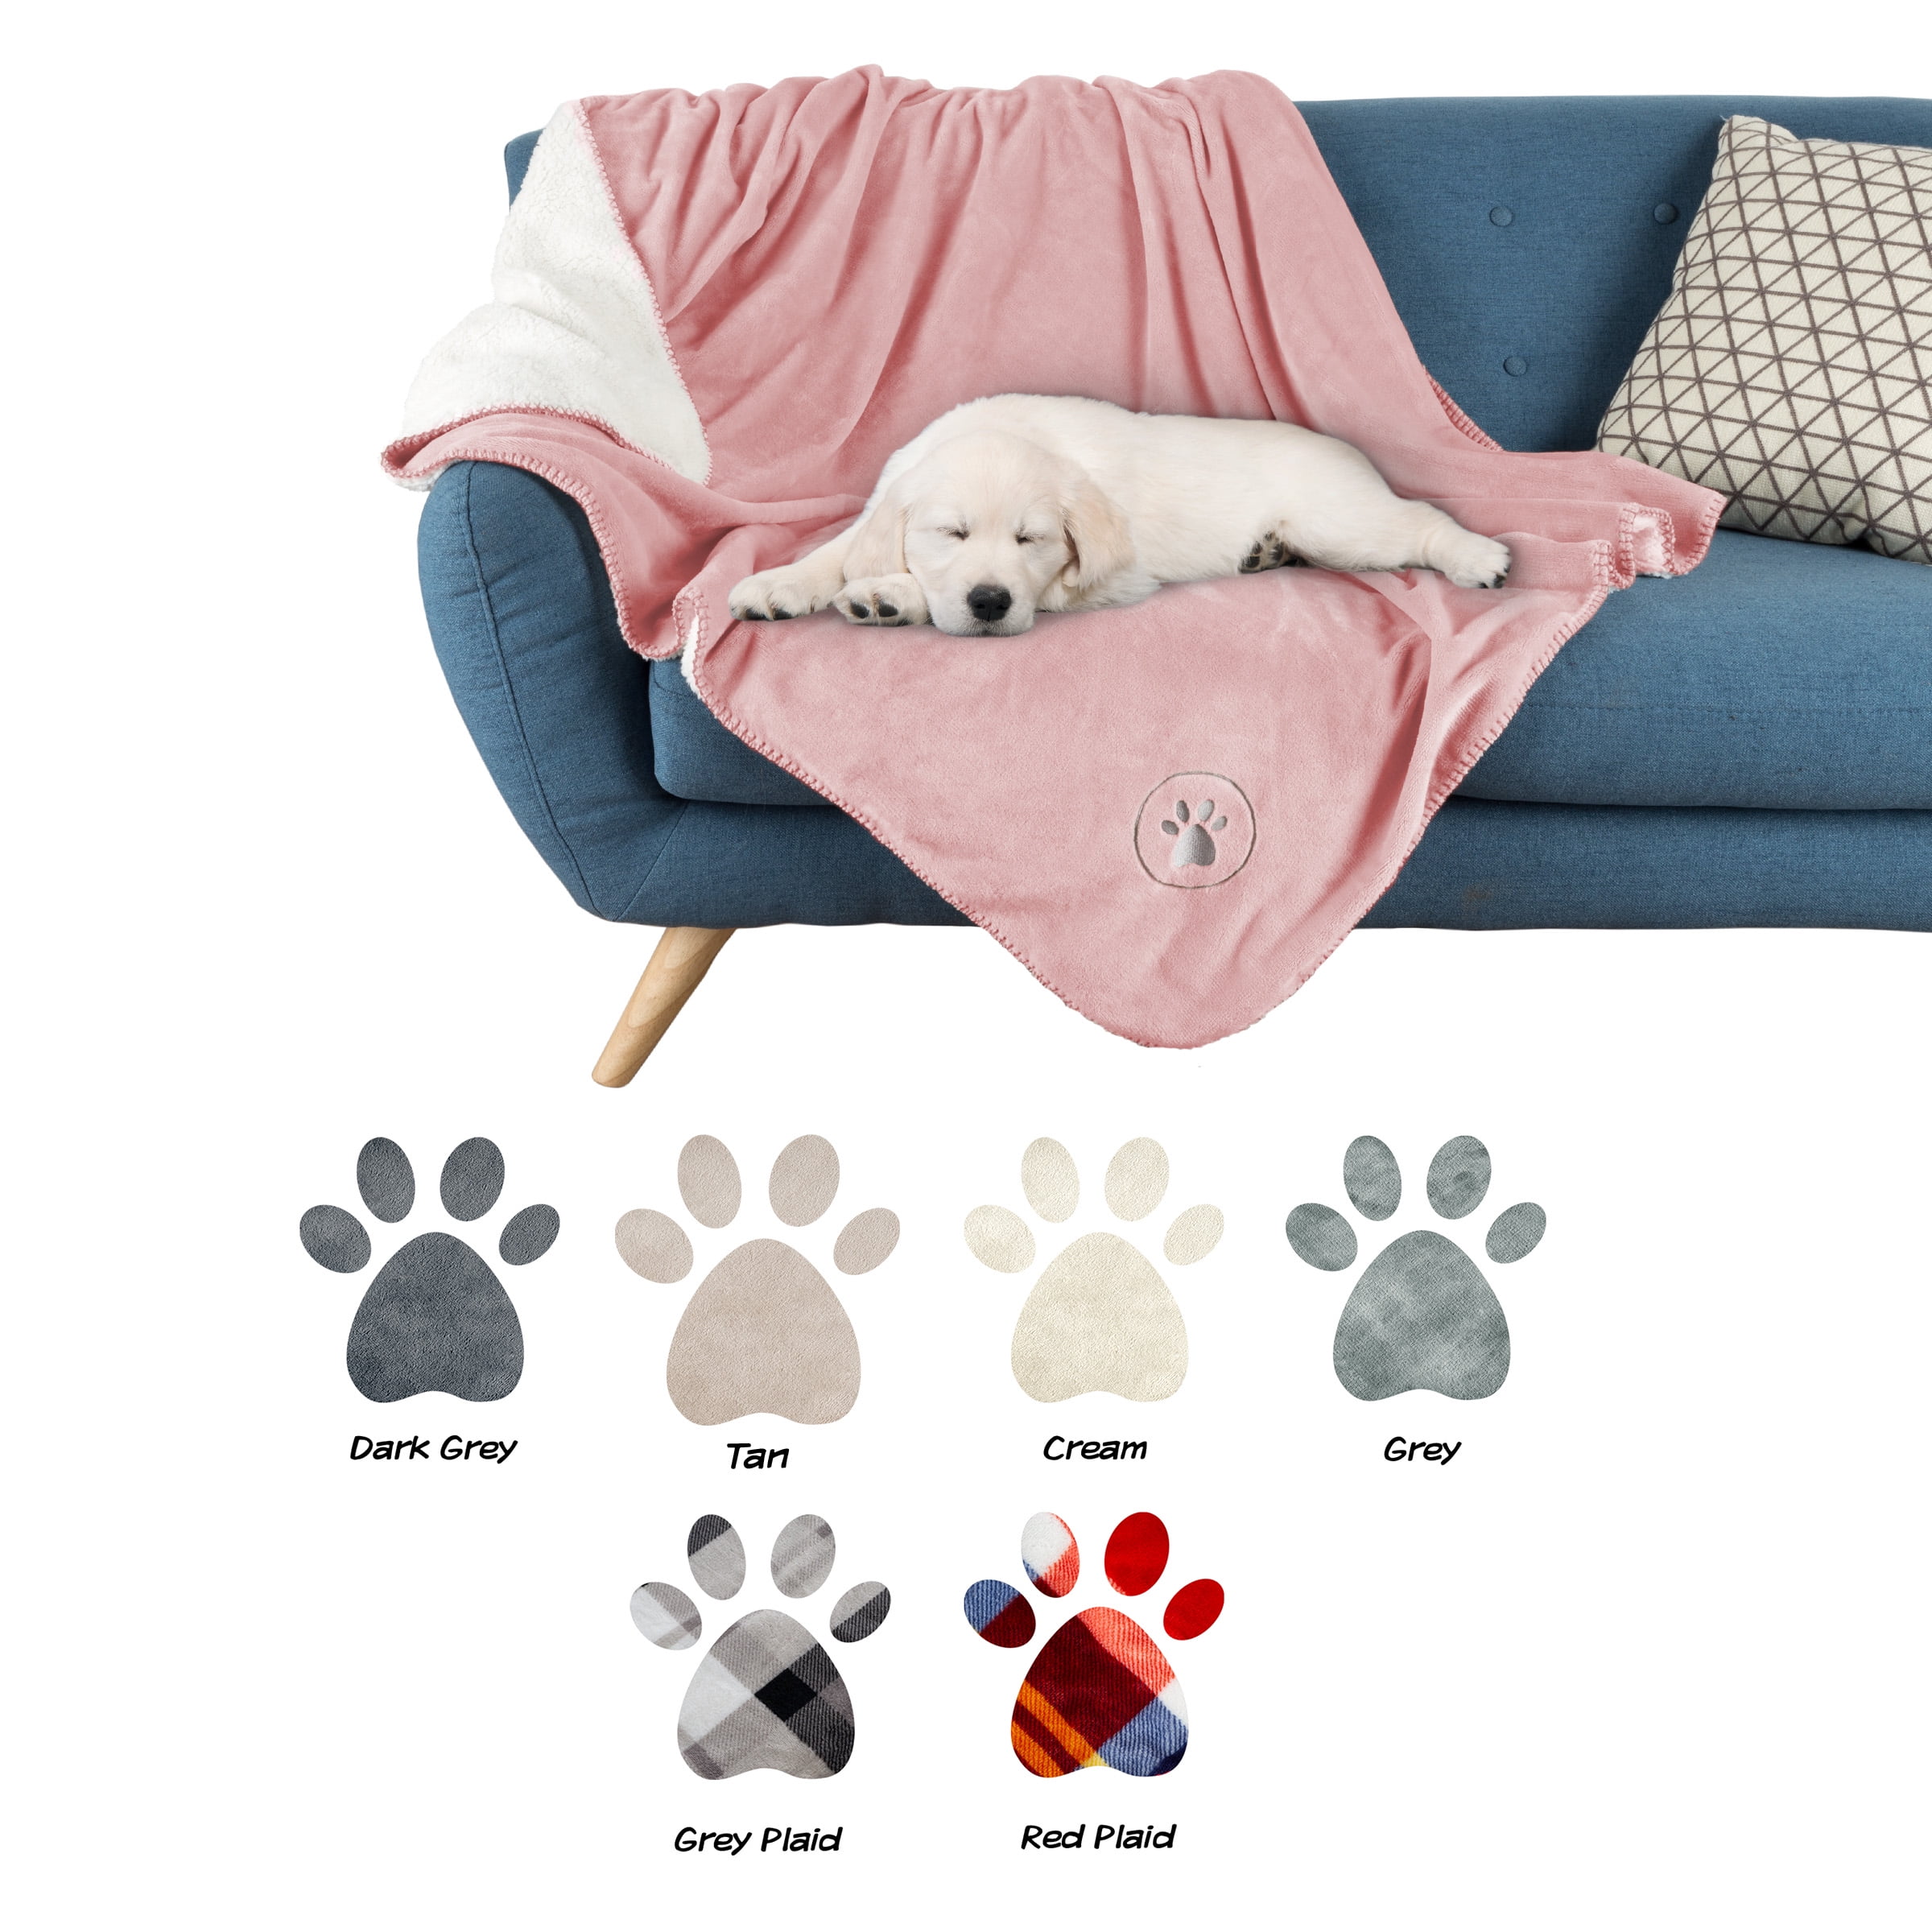 Waterproof Pet Blanket – Reversible Tan Throw Protects Couch, Car, Bed from  Spills, Stains, or Fur – Dog and Cat Blankets by Petmaker (50x60) -  